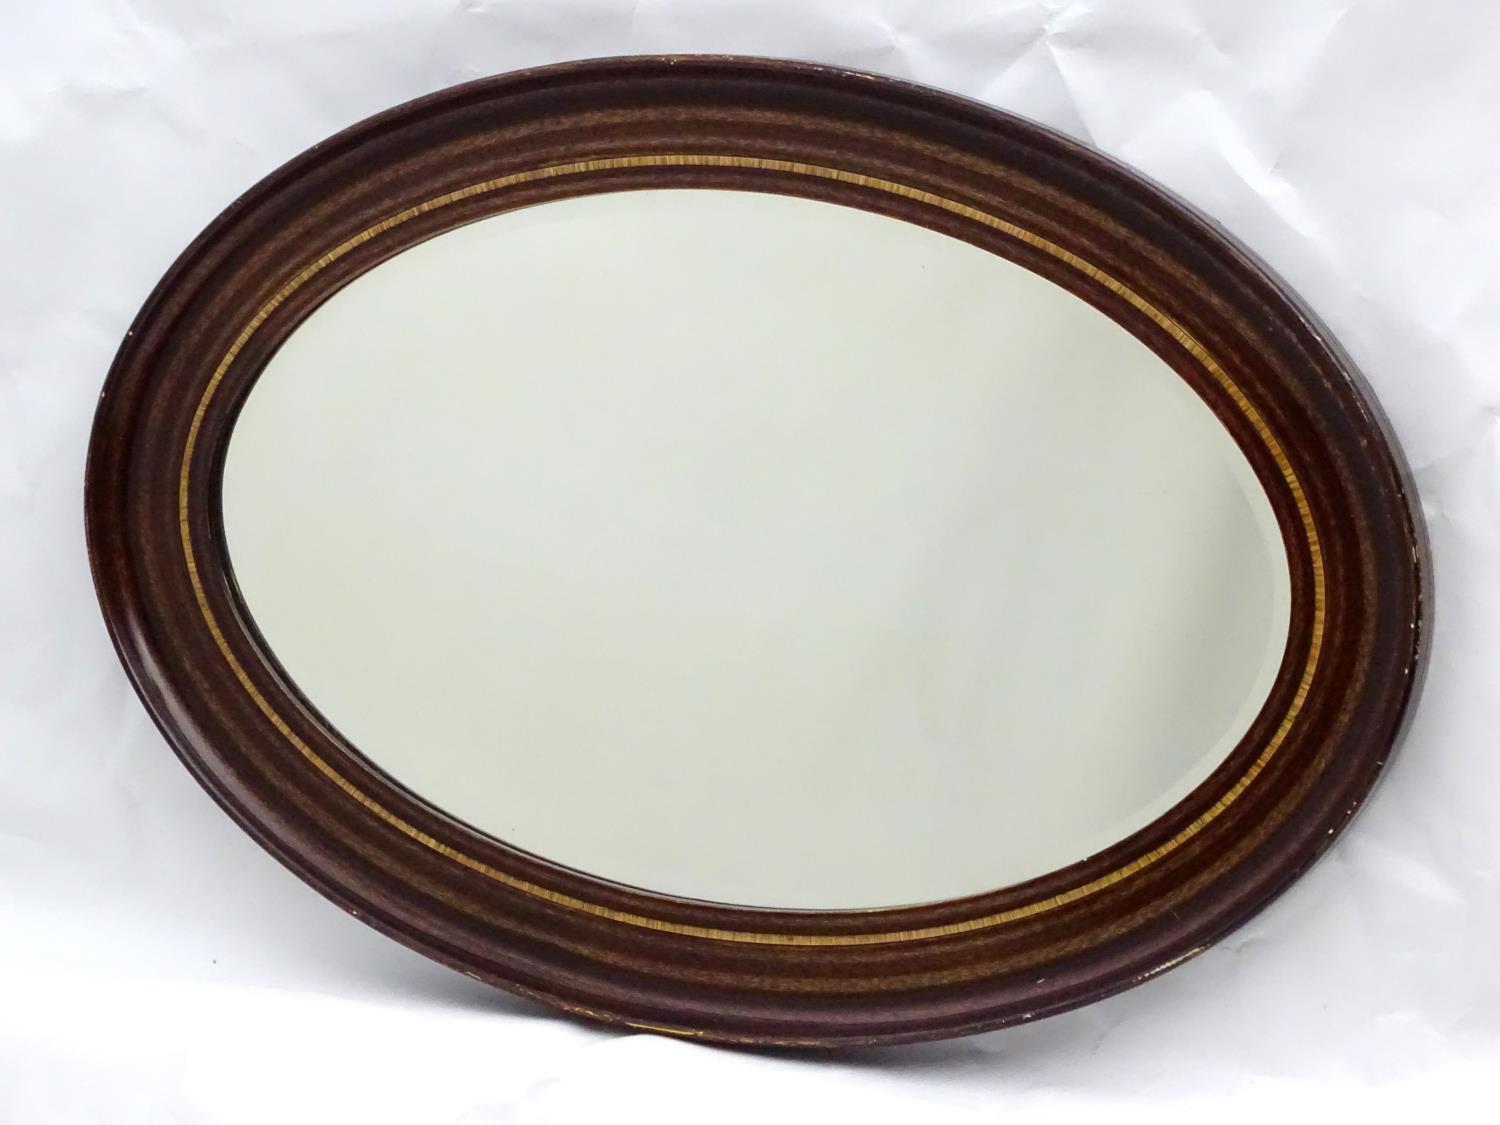 A mid 20thC oval bevelled mirror with crossbanded detailing to the frame. - Image 10 of 10